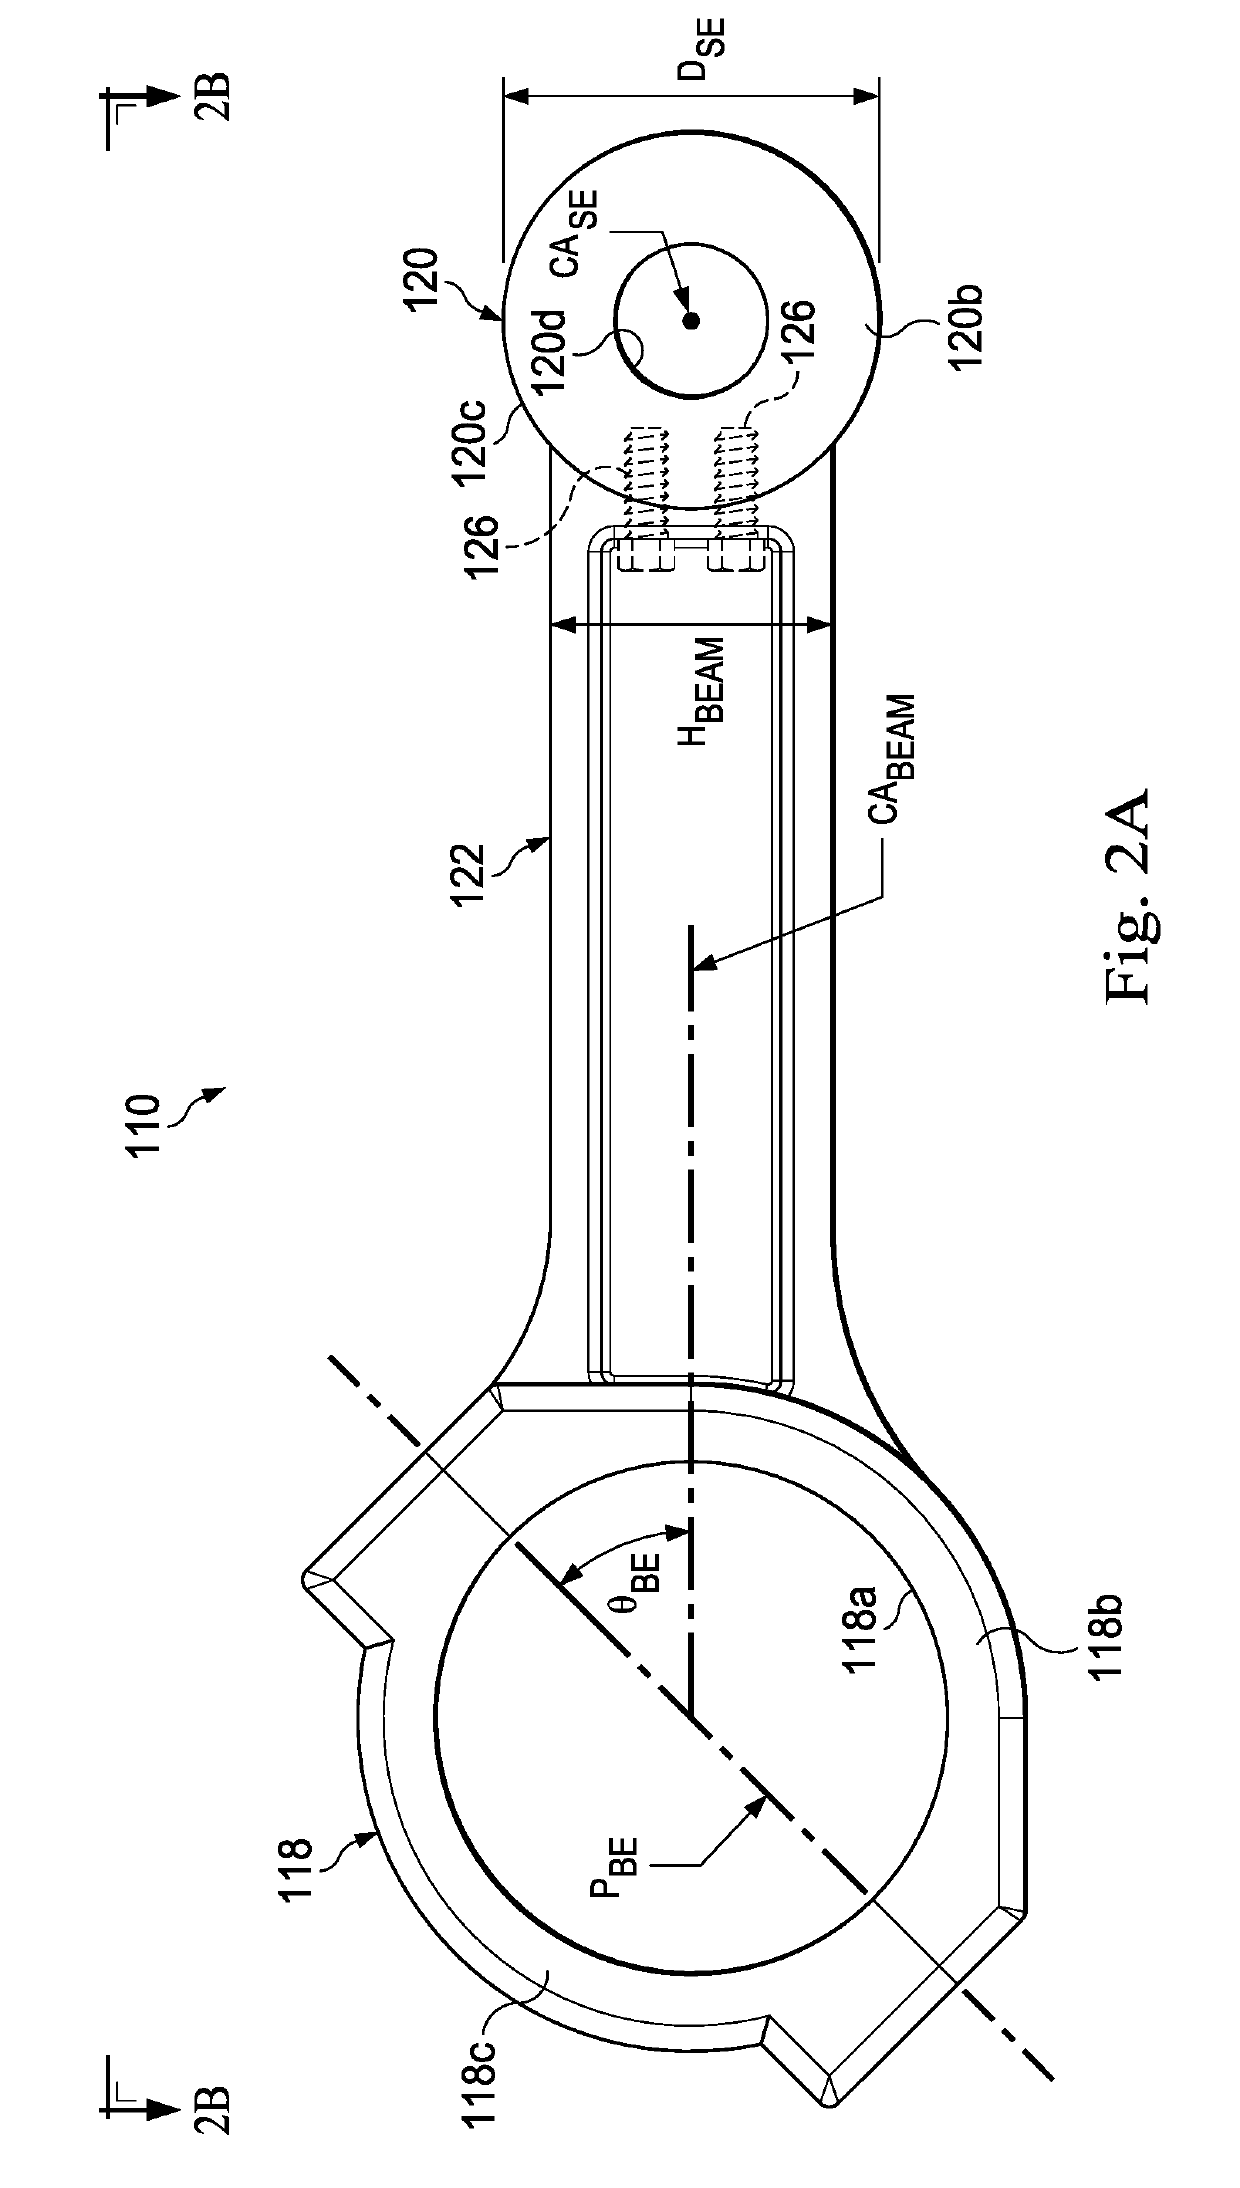 Connecting rod and crosshead assembly for enhancing the performance of a reciprocating pump